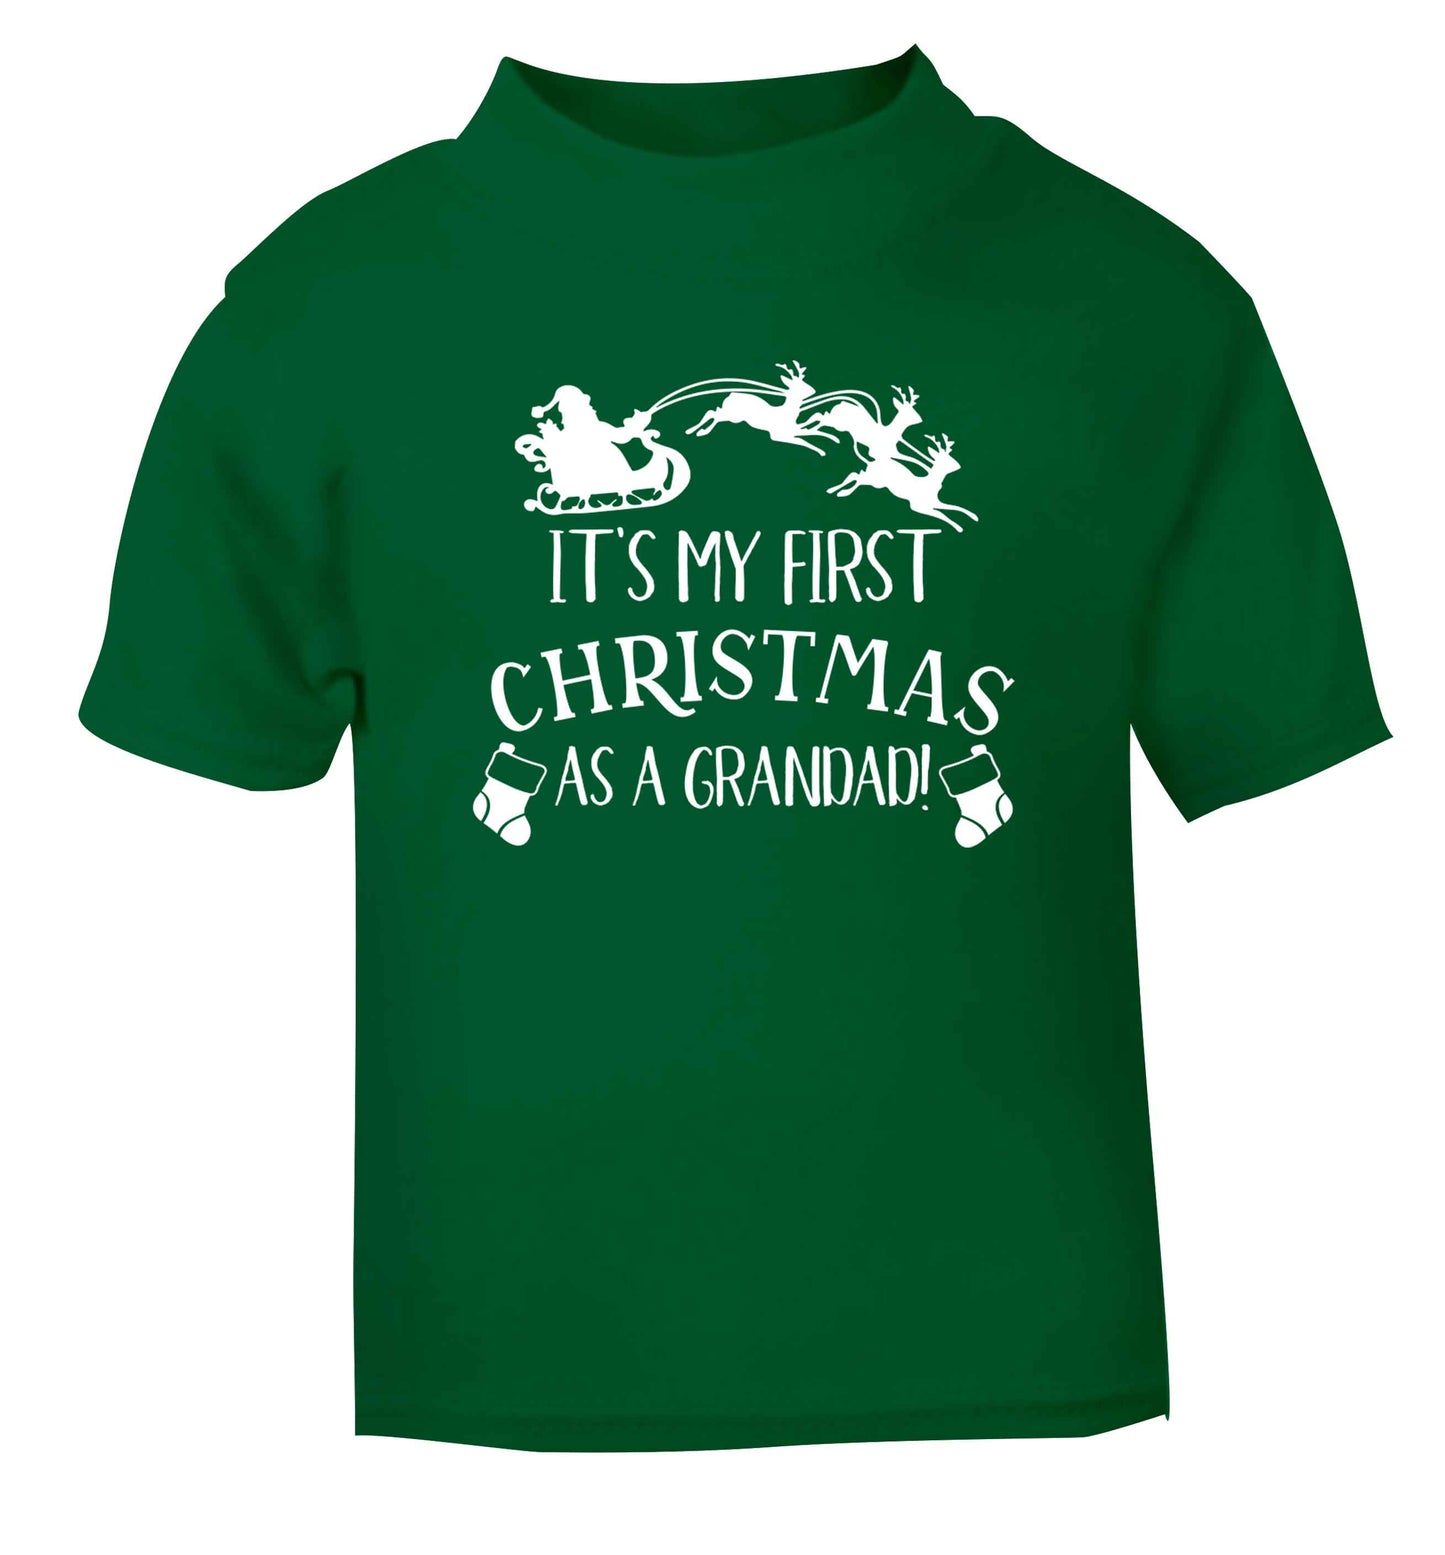 It's my first Christmas as a grandad! green Baby Toddler Tshirt 2 Years